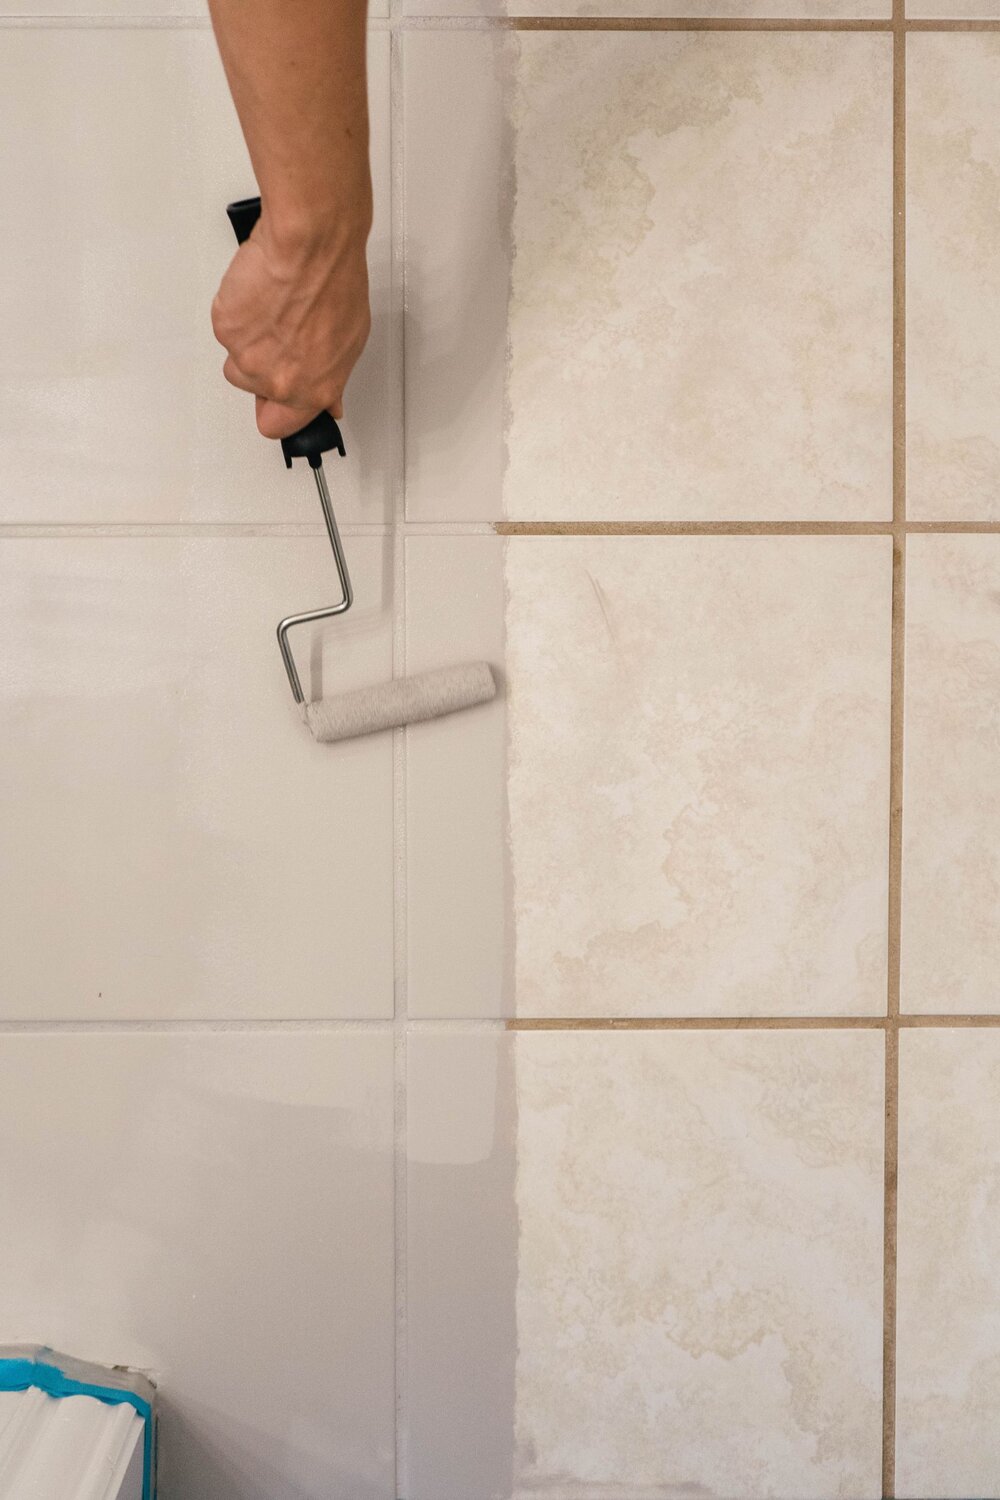 Diy How To Paint Ceramic Floor Tile, What Kind Of Paint Do You Use On Ceramic Tile Floors